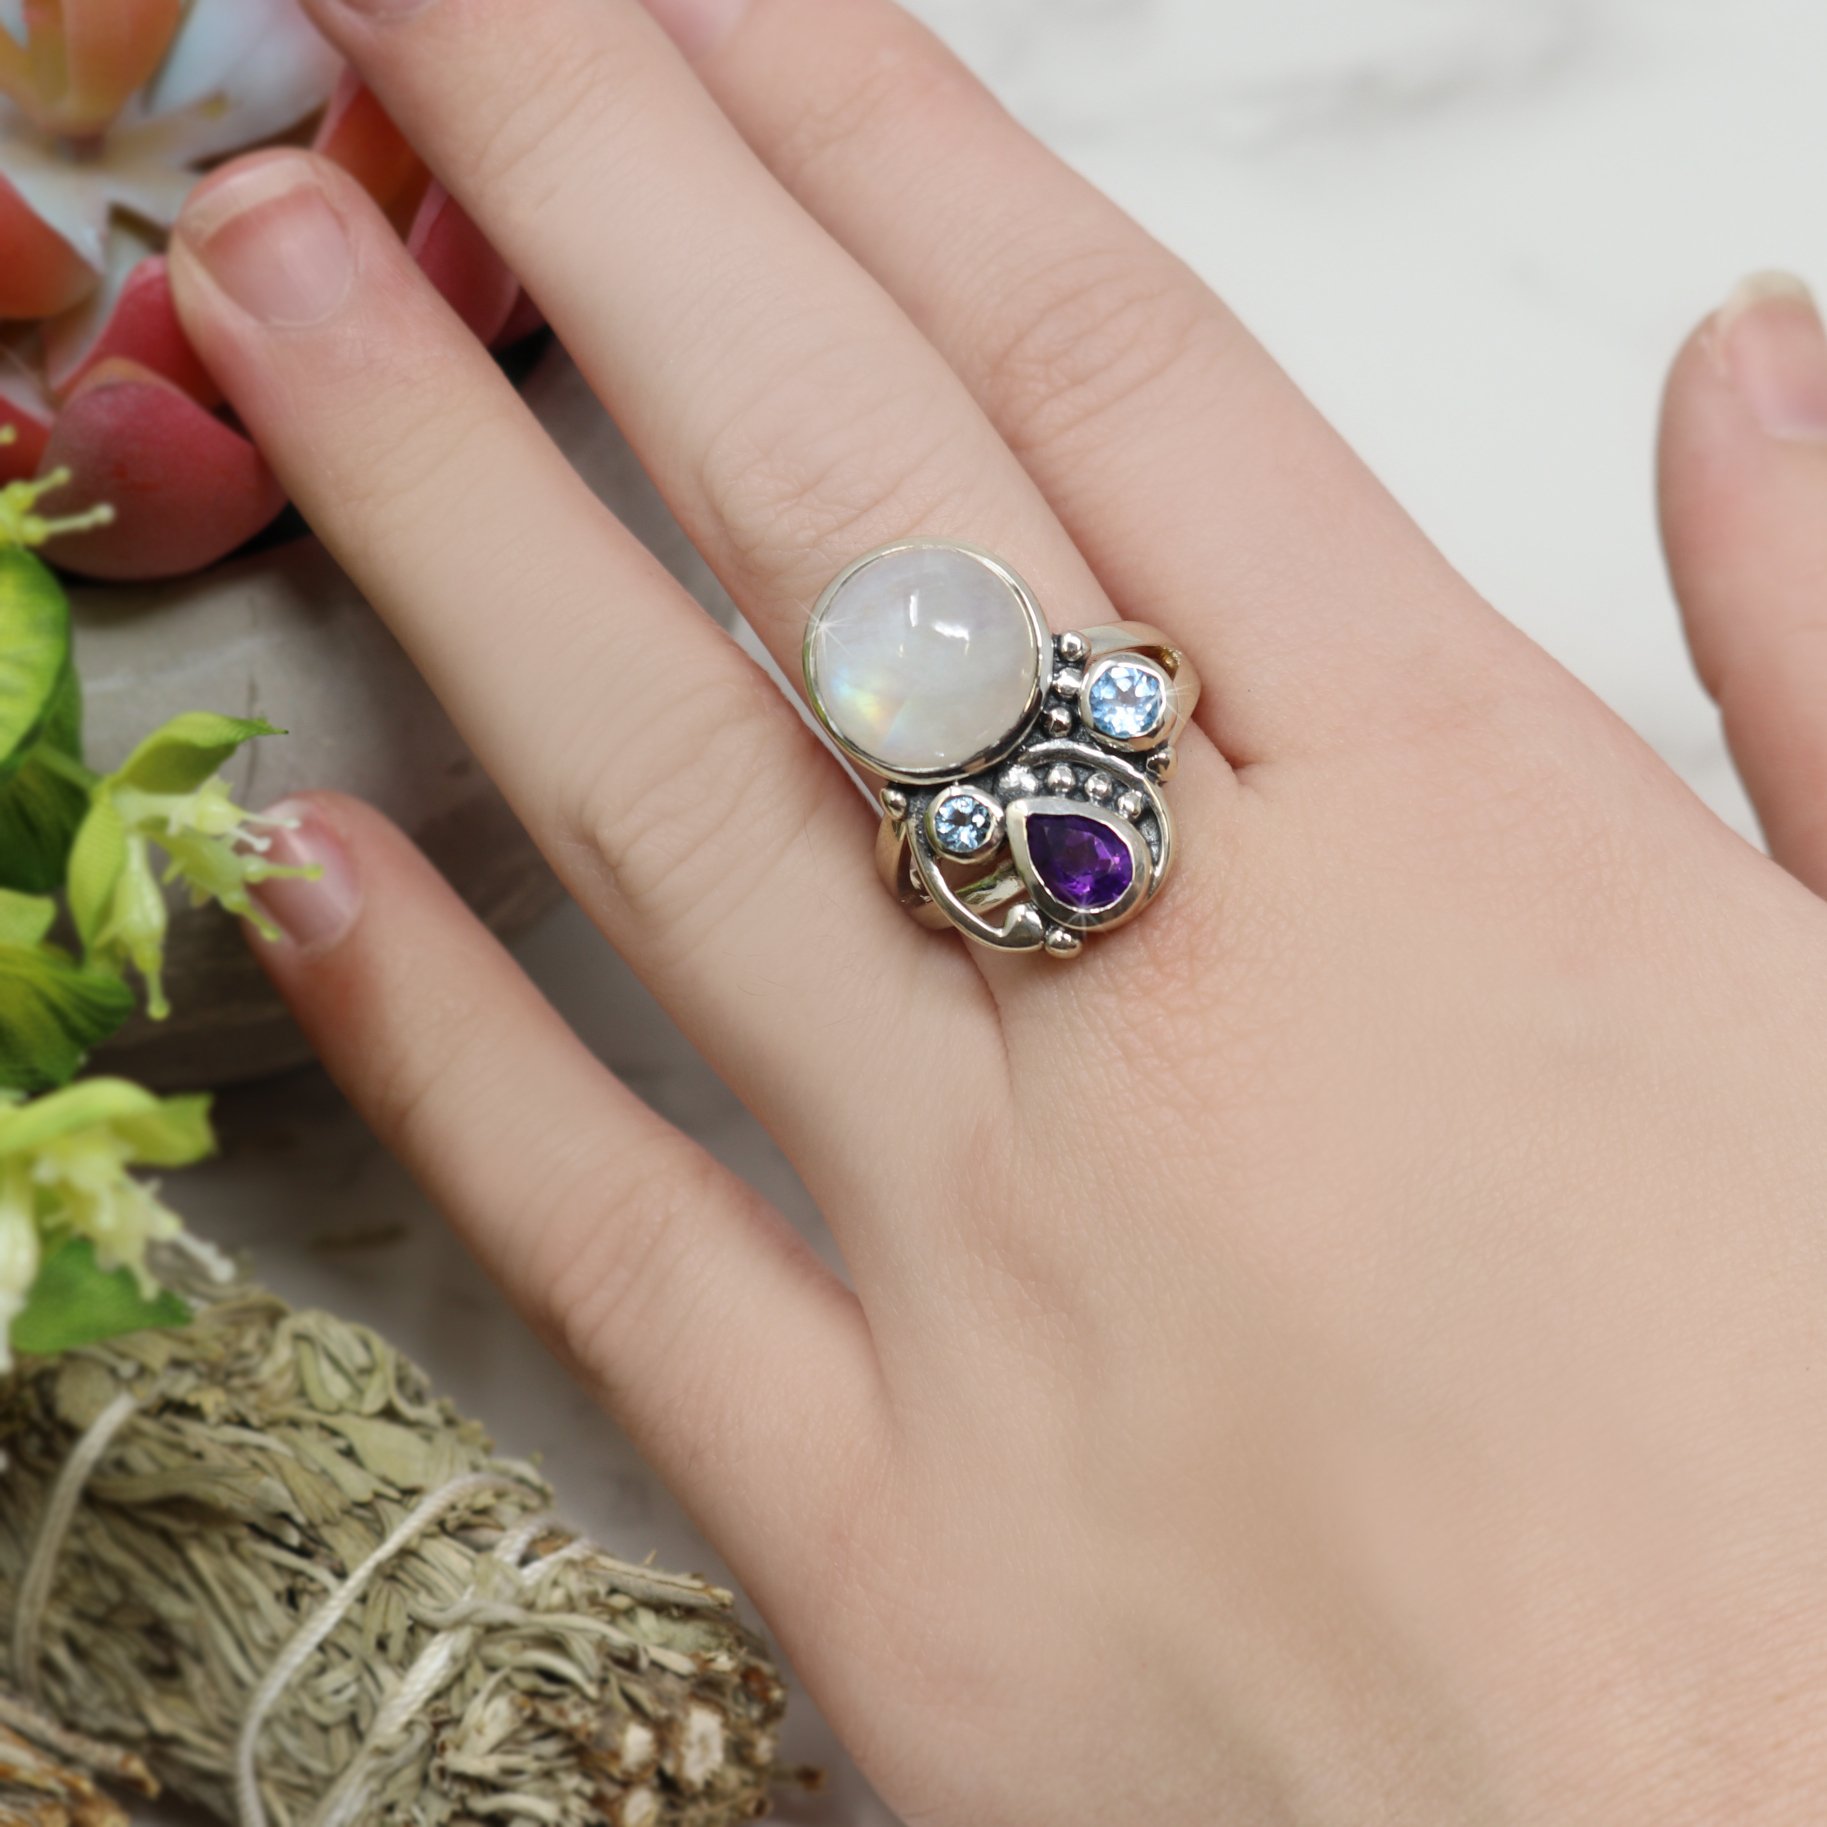 Rainbow Moonstone Ring - Round Cabochon With Faceted Amethyst Pear & Faceted Blue Topaz Rounds With 925 Sterling Silver Bezels With Beading On Open Band Sz8